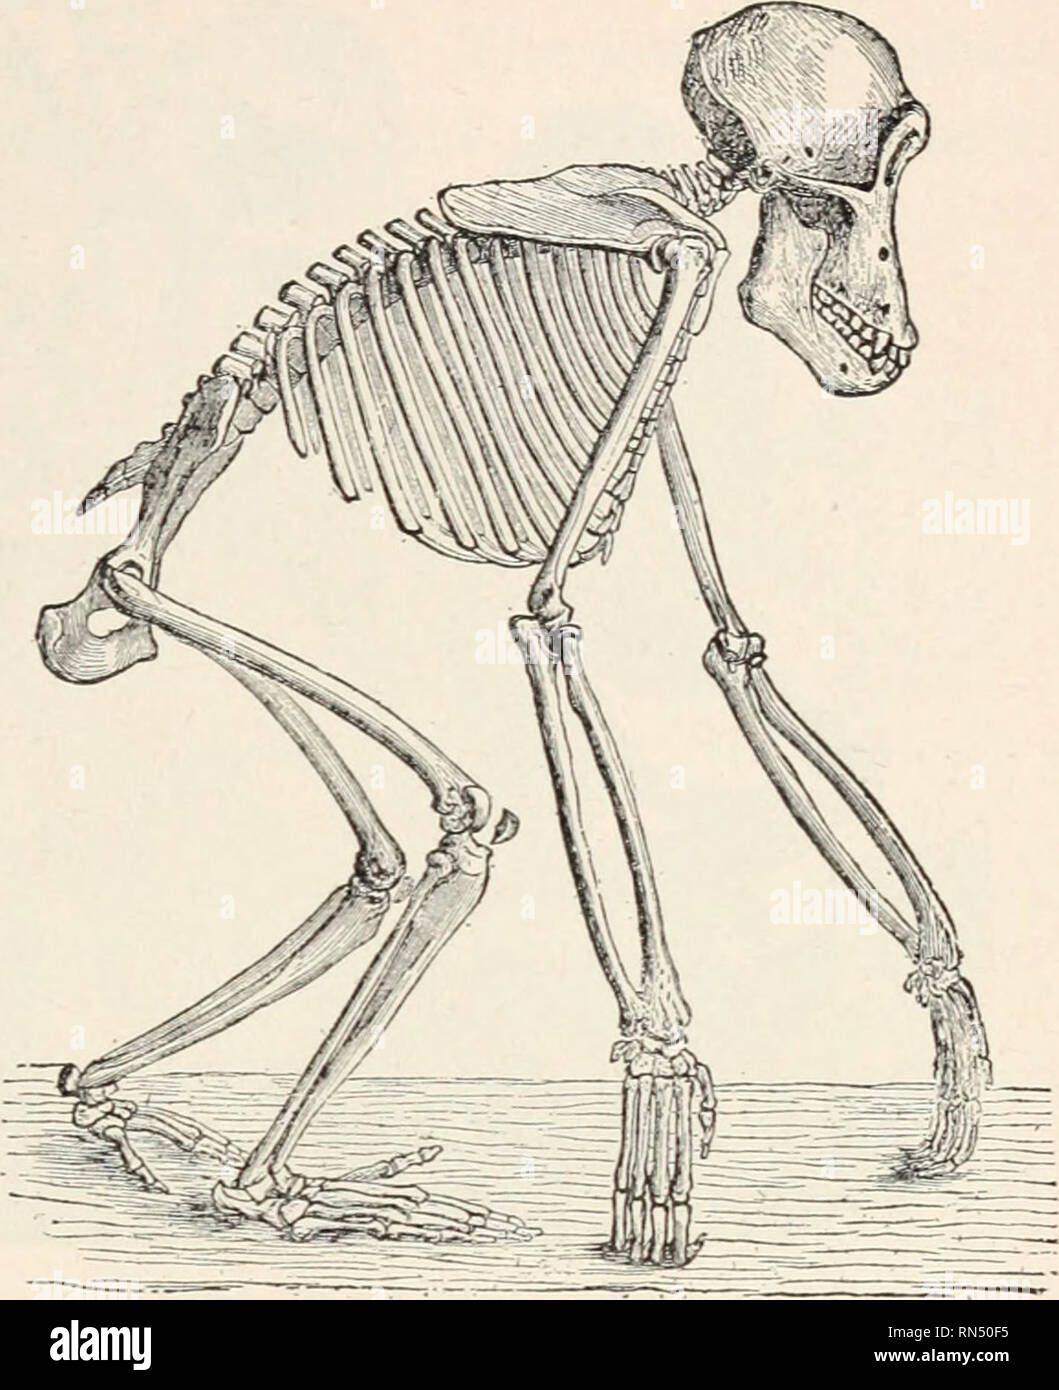 Animal biology; Human biology. Parts II &amp; III of First course in  biology. Biology. FIG. 400. —CHIMPANZEE. (See Fig. 406.) Illustrated Study  of Vertebrate Skeletons: Taking man's skeleton as complete, which